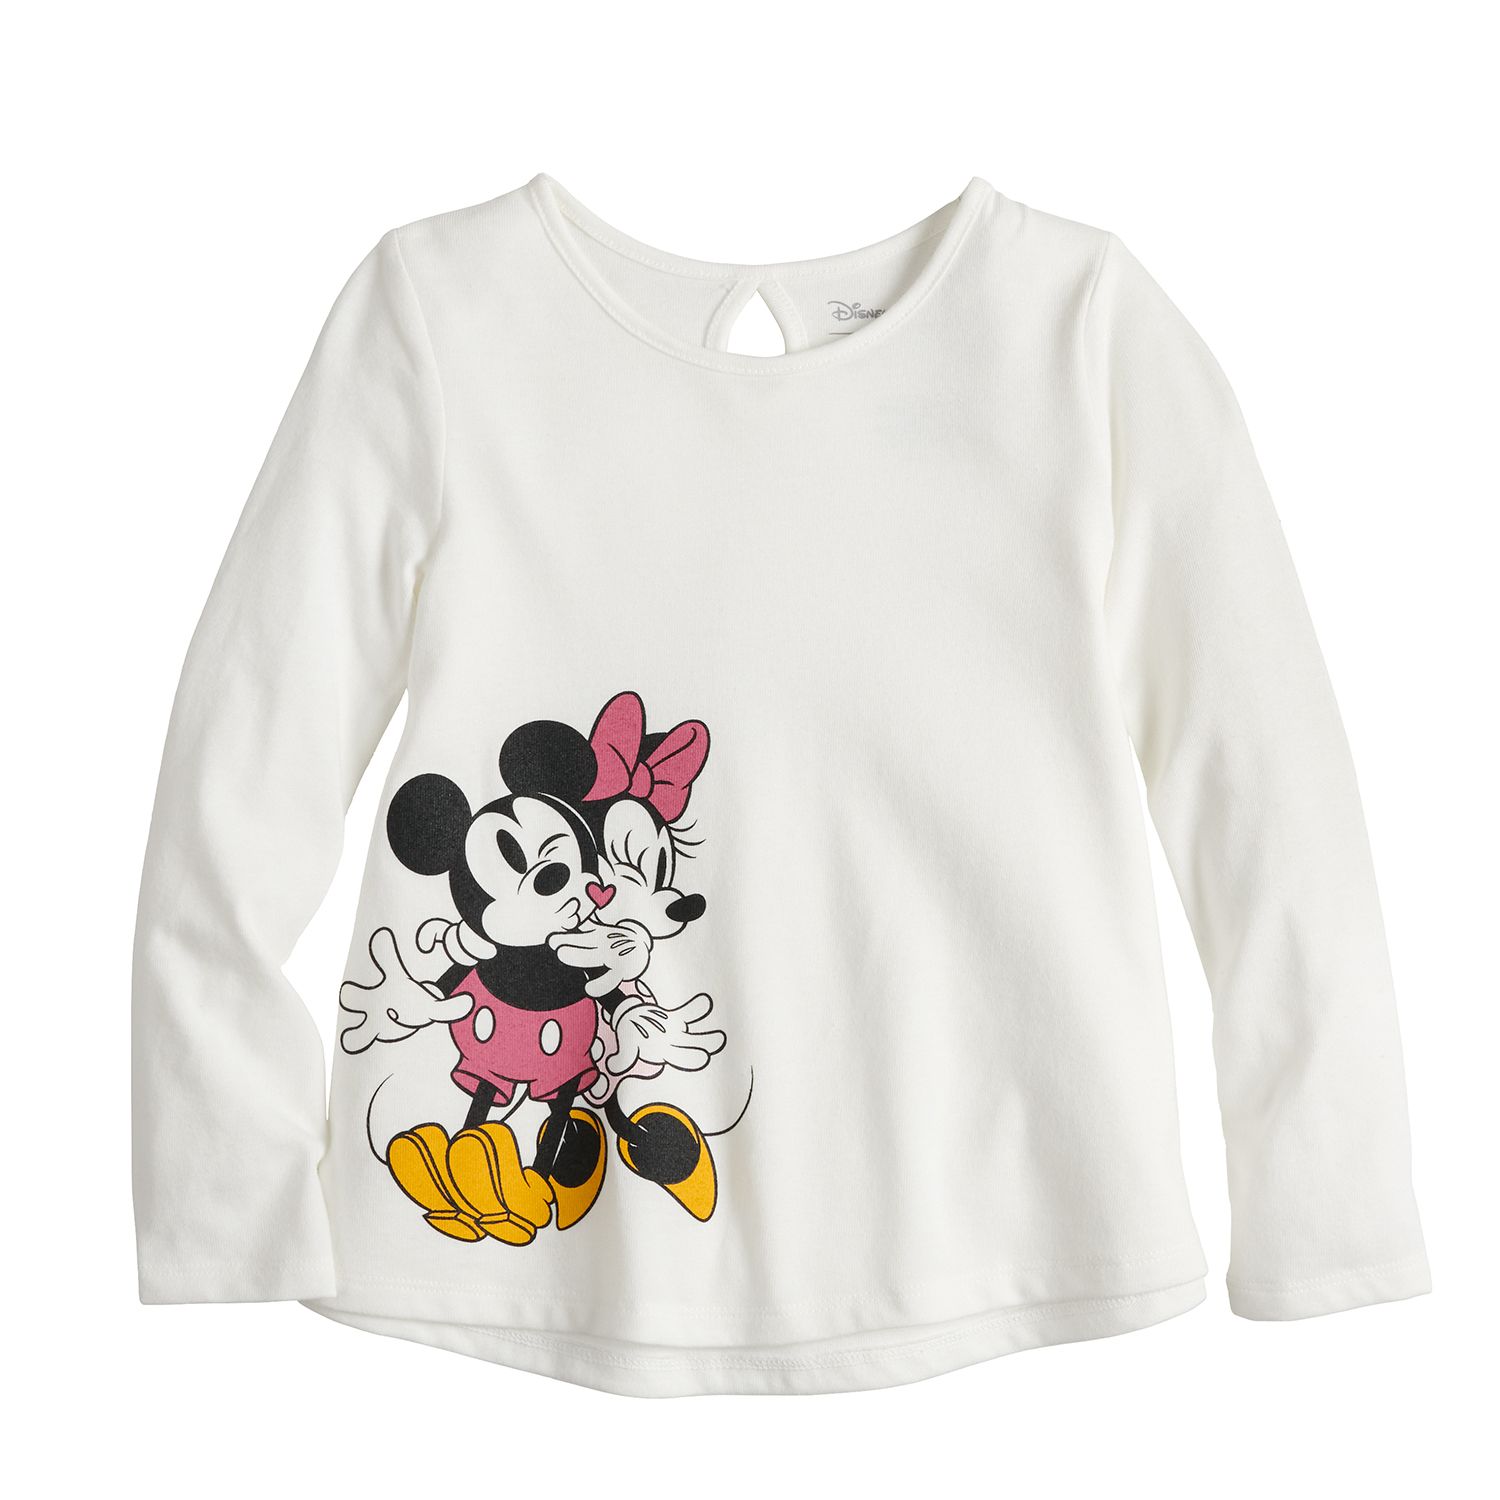 Image for Disney/Jumping Beans Disney's Minnie Mouse Toddler Girl Keyhole Swing Tee by Jumping Beans® at Kohl's.